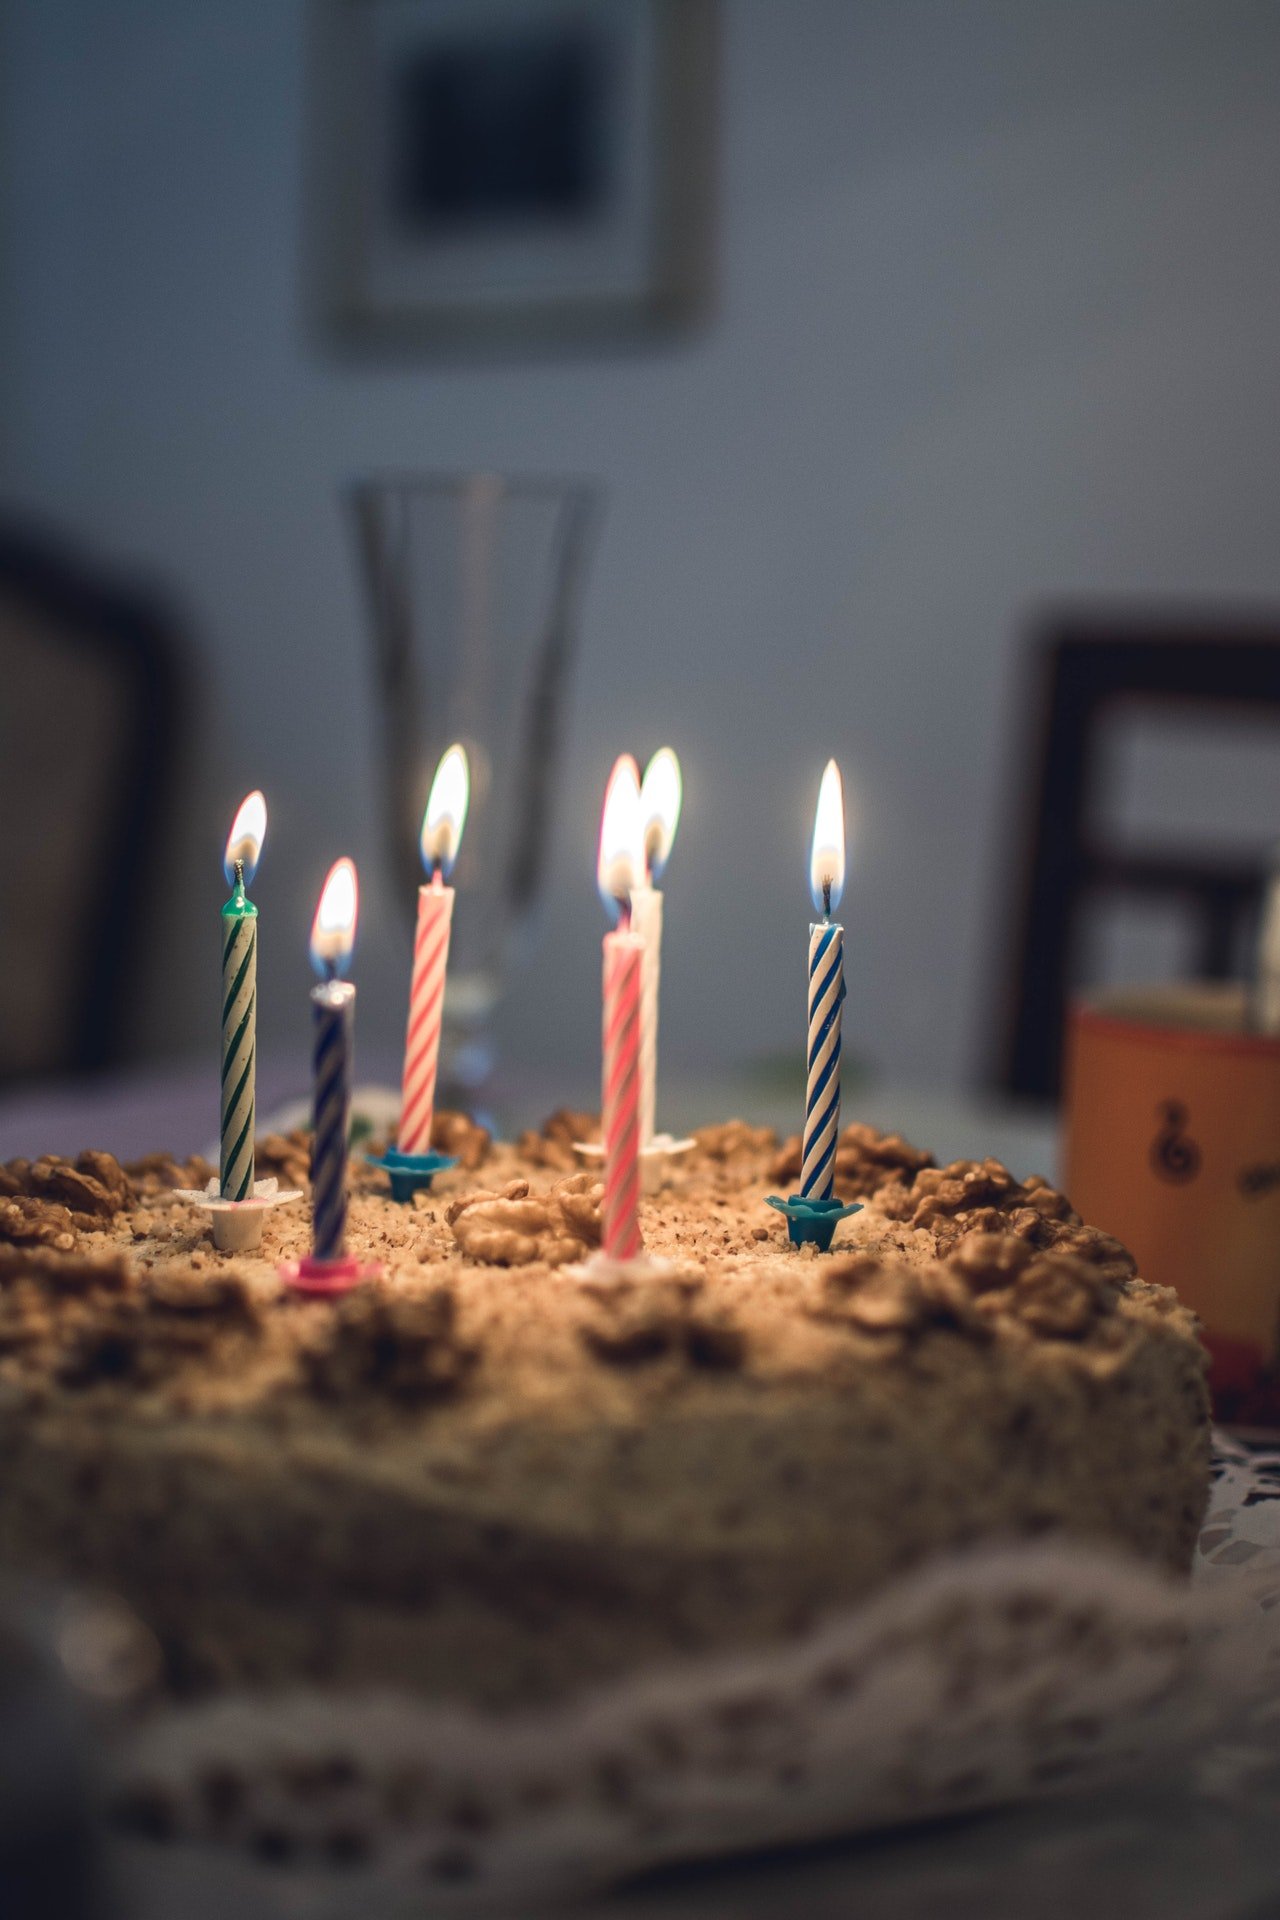 Oliver blew the candles on his birthday cake happily. | Source: Pexels